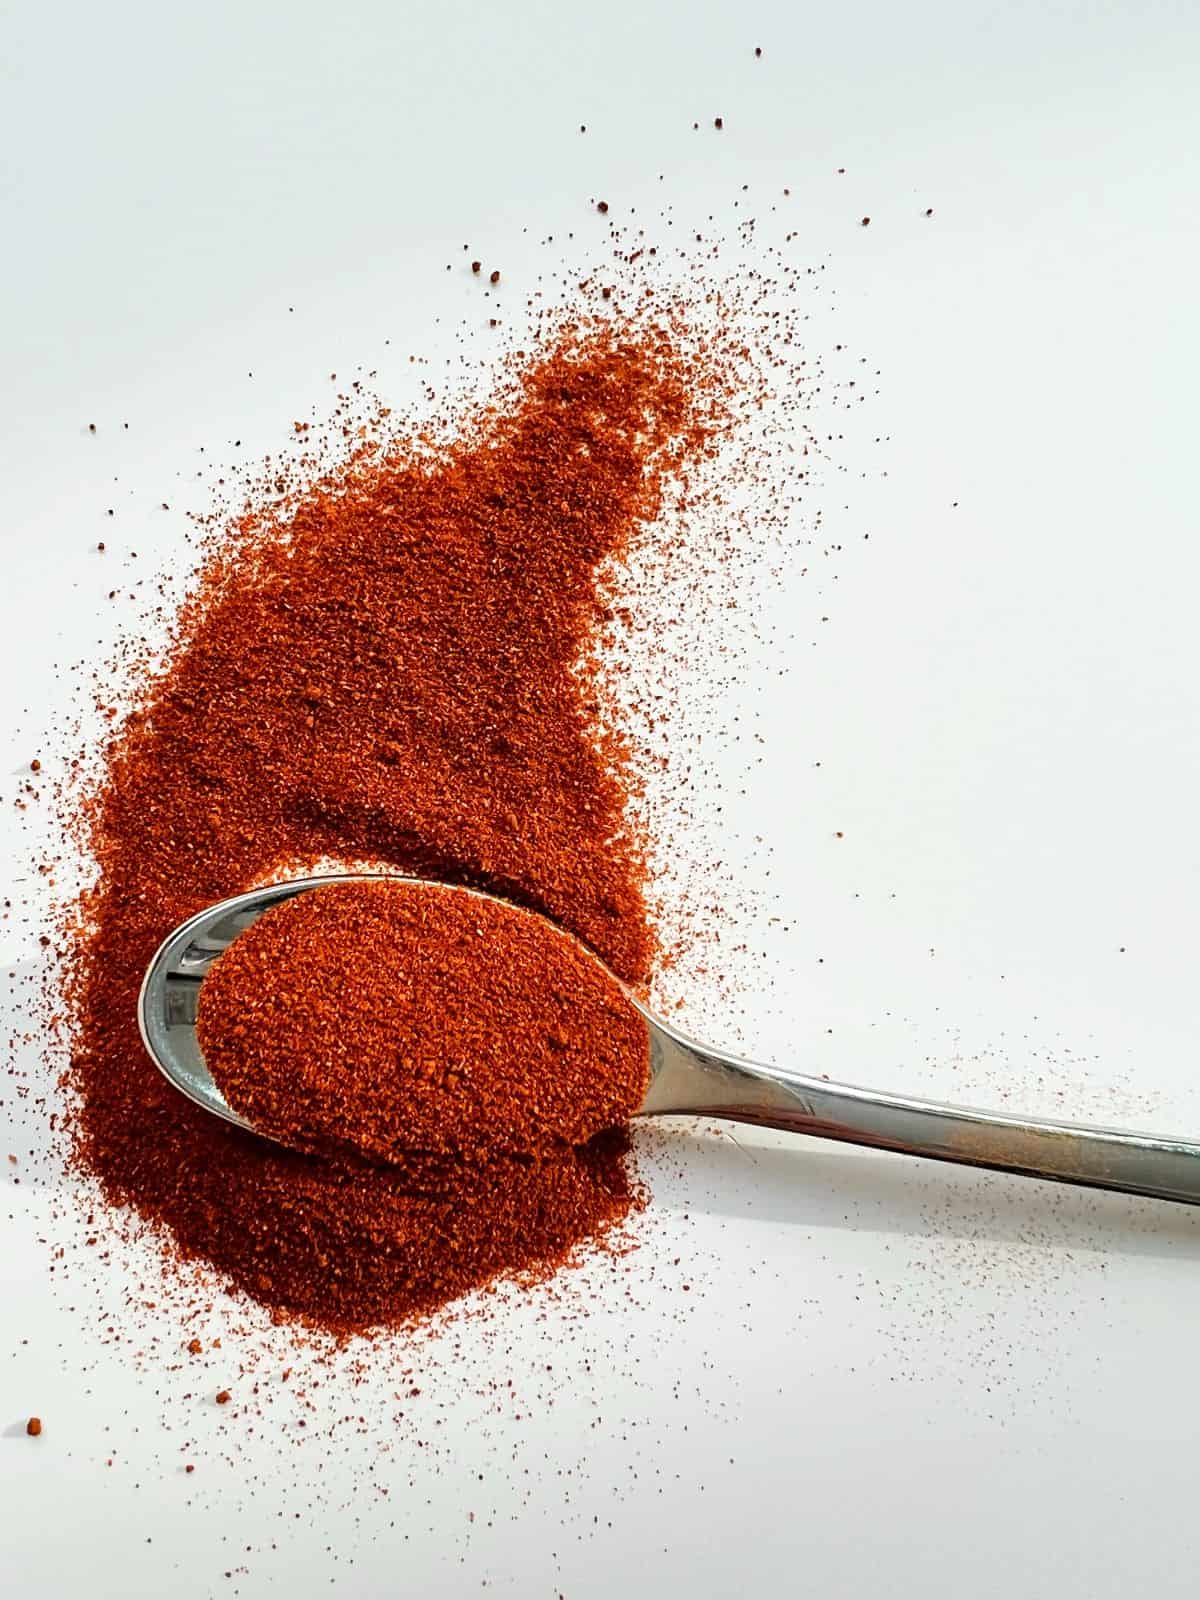 An image of spanish smoked paprika on a silver spoon and scattered against a white countertop.